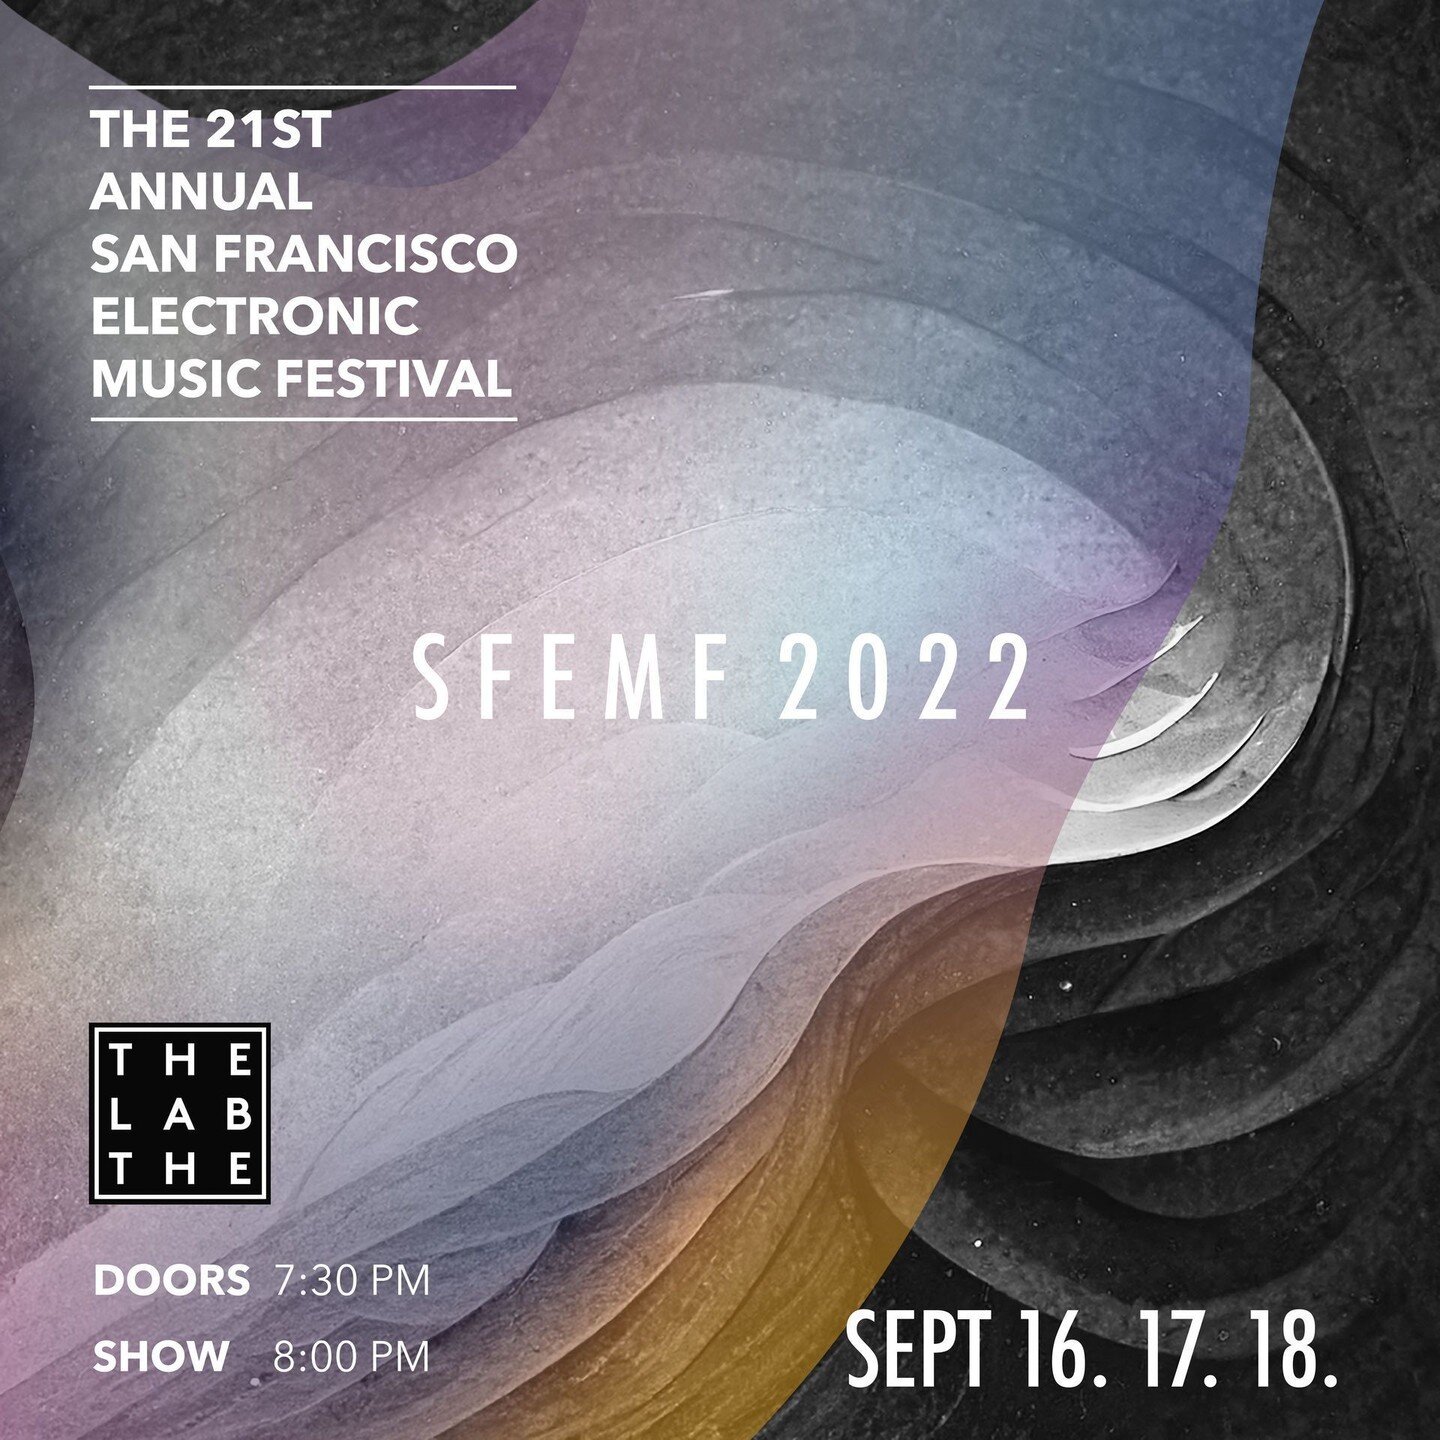 The 21st Annual San Francisco Electronic Music Festival 
September 16&ndash;18, 2022

Program:

Friday, Sept 16th
7:30pm doors / 8:00pm show
Michelle Moeller. shipwreck detective (Dev Bhat), Luciano Chessa
Ticket link in bio
 
Saturday, Sept 17th
7:3